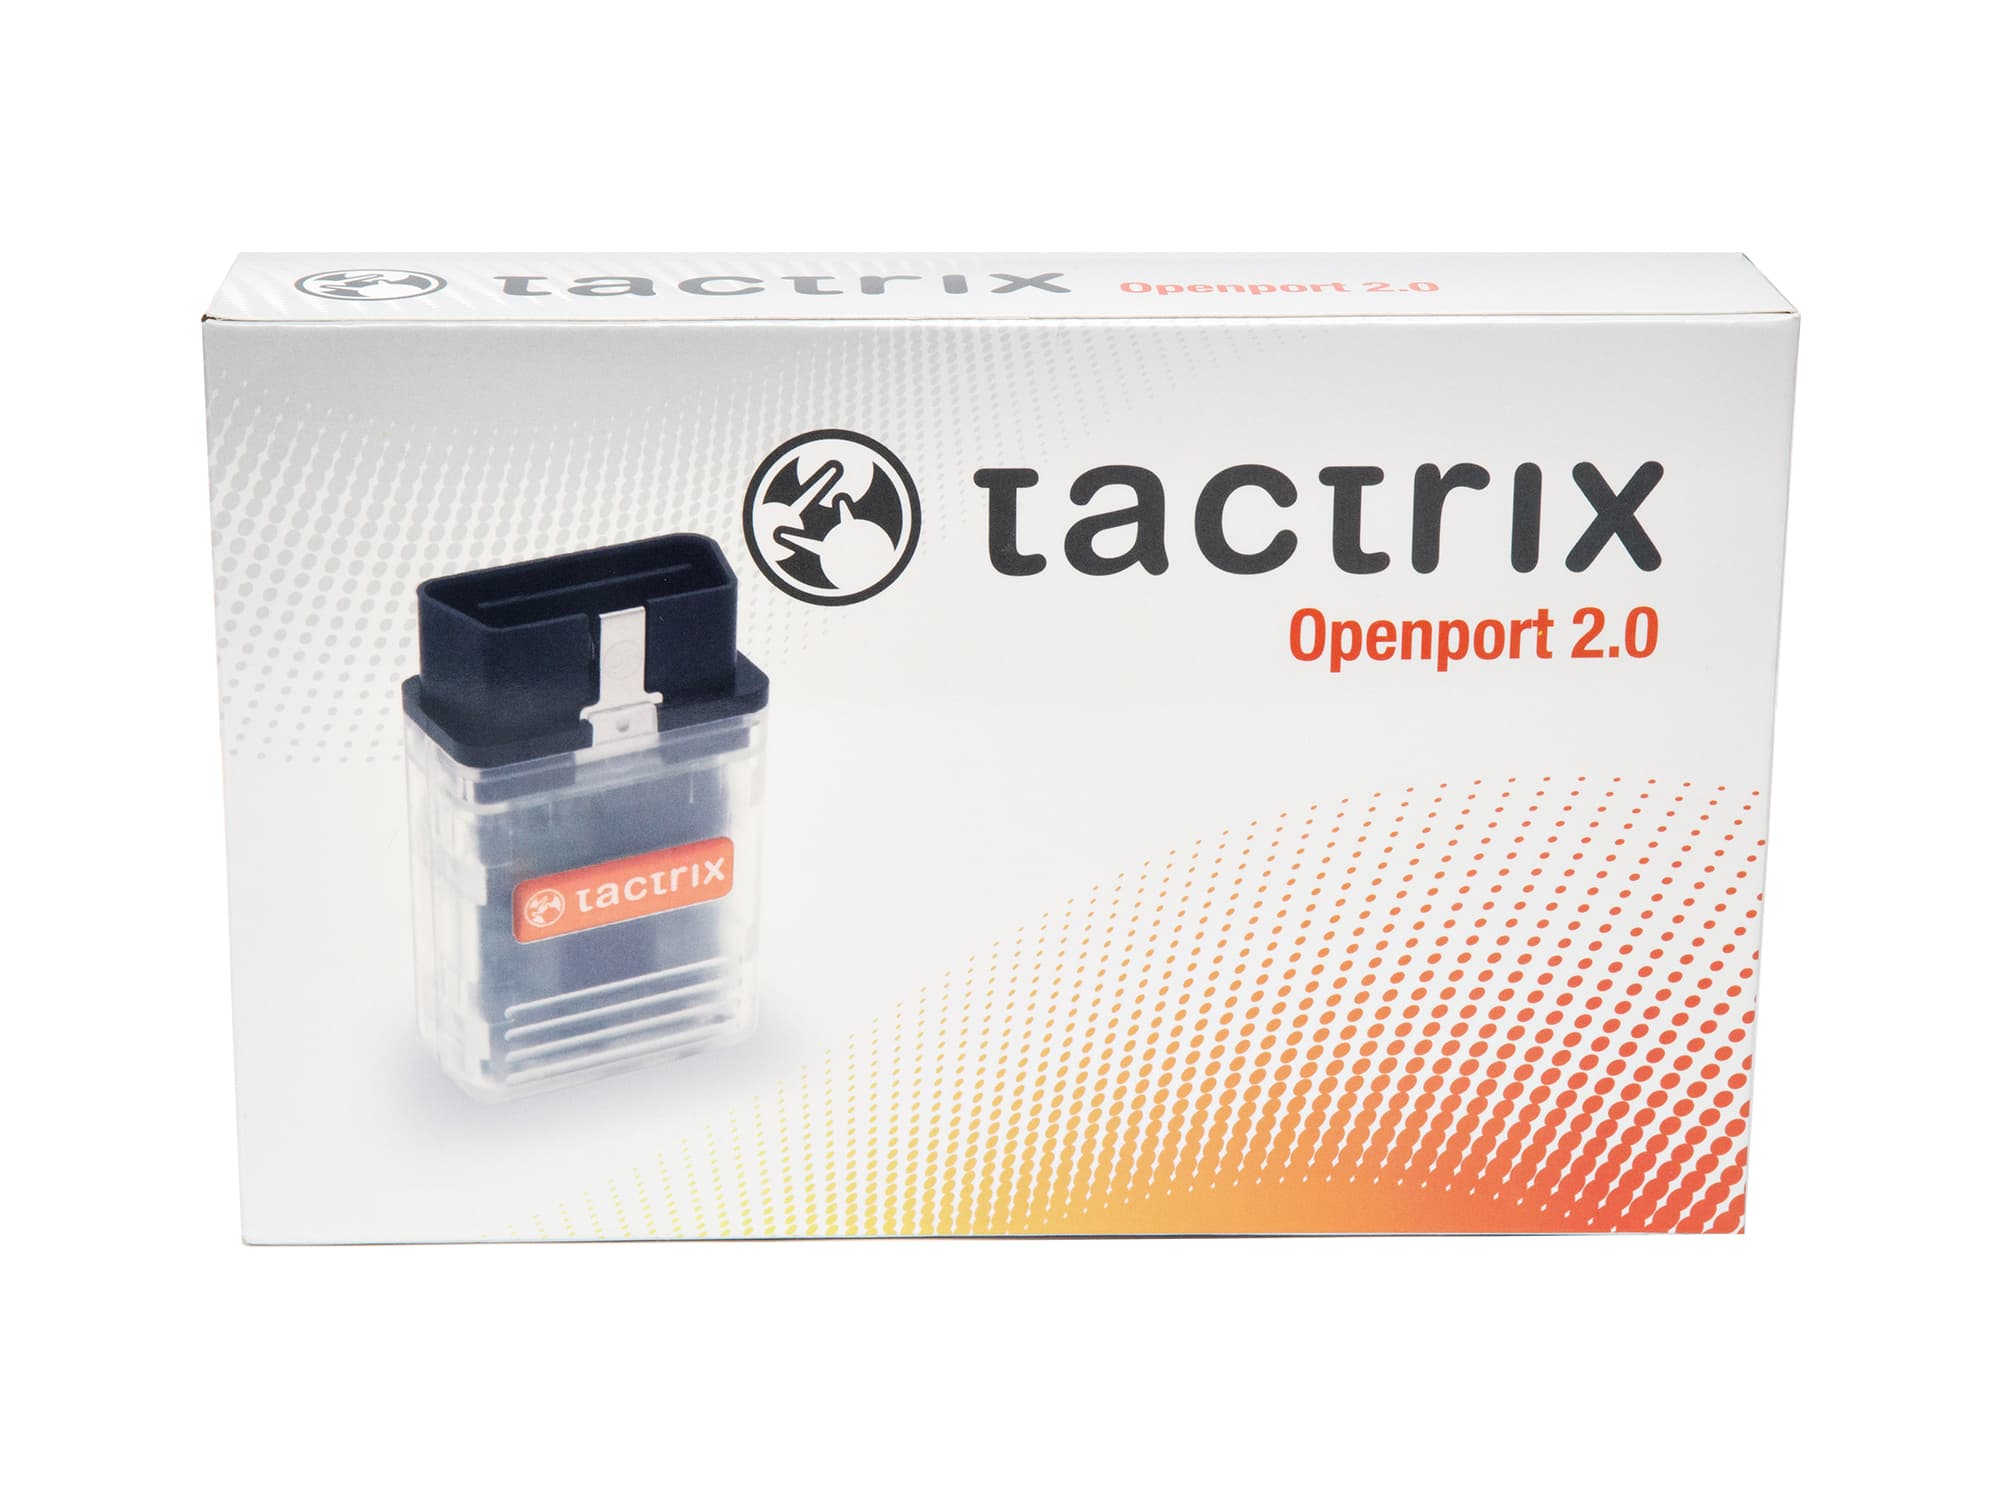 using tactrix openport 2.0 to clear codes on ford